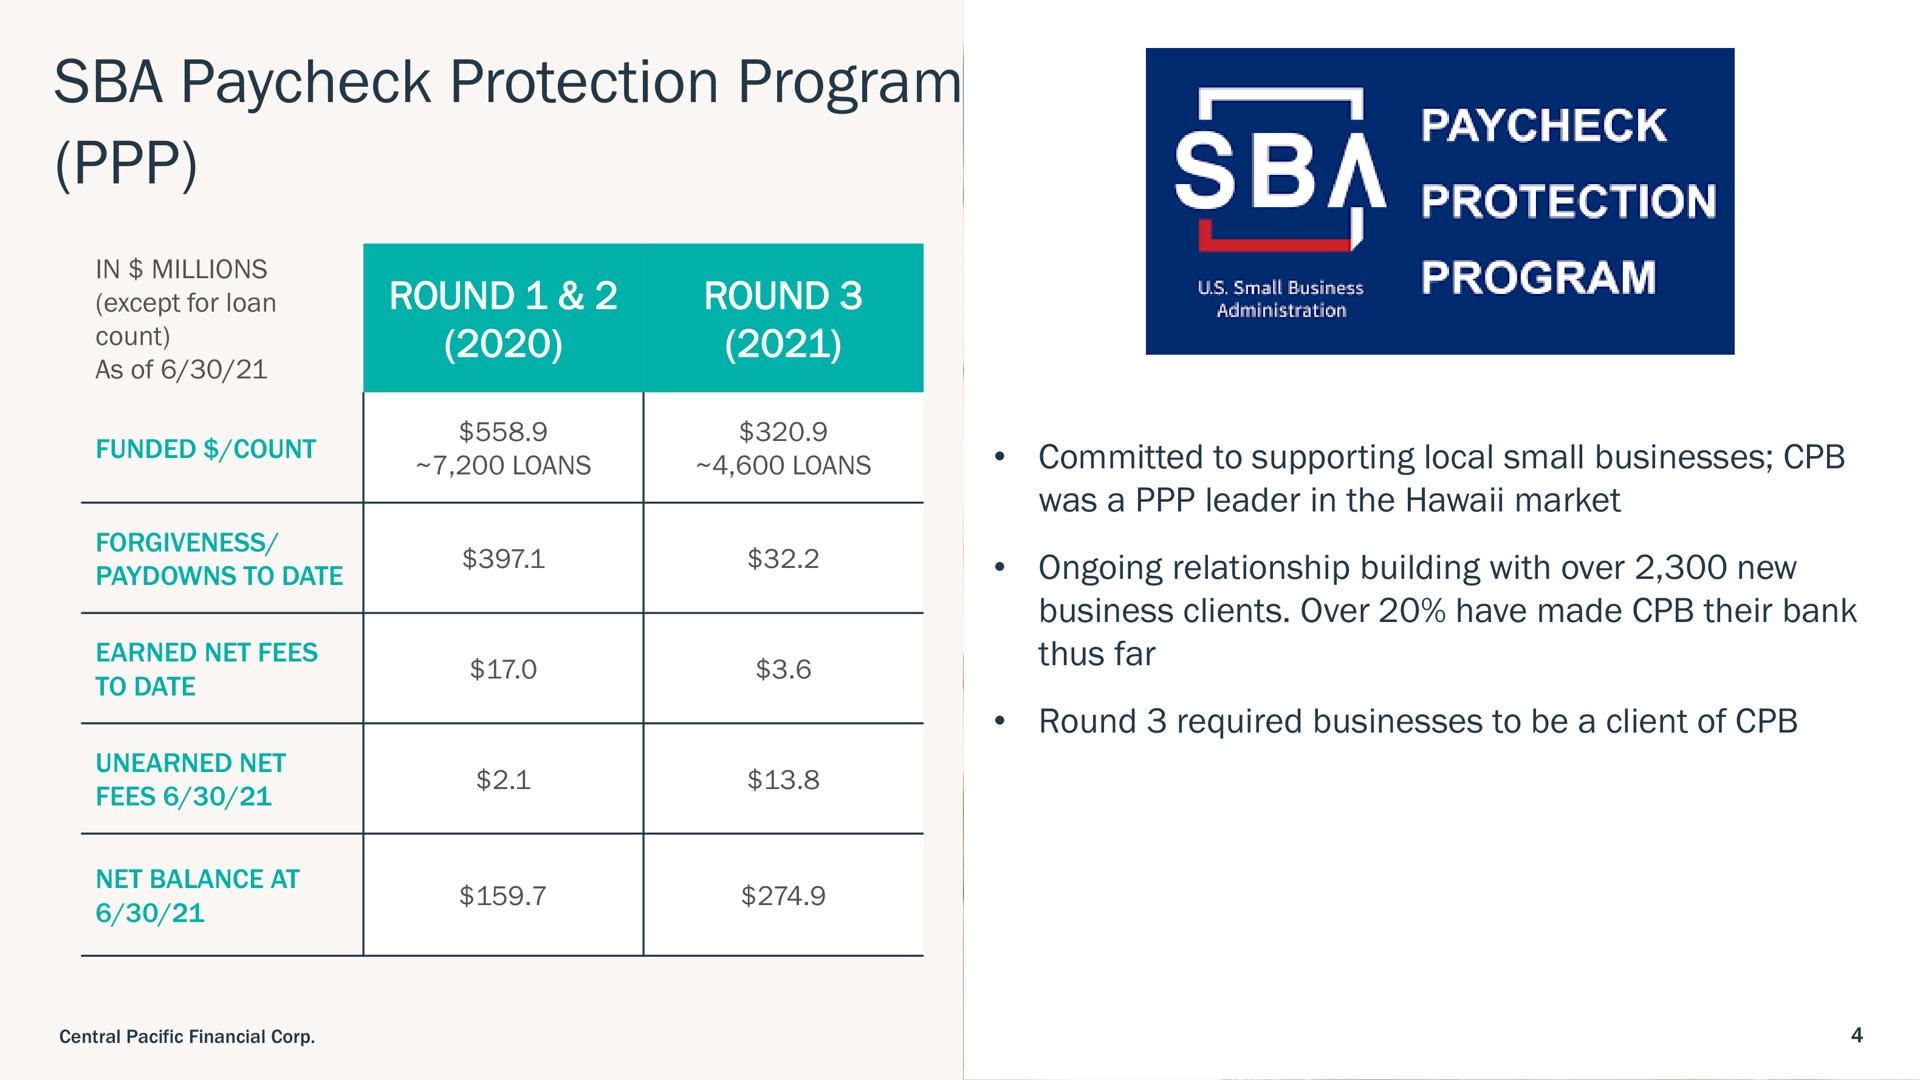 protection program round round net balance at i | Central Pacific Financial